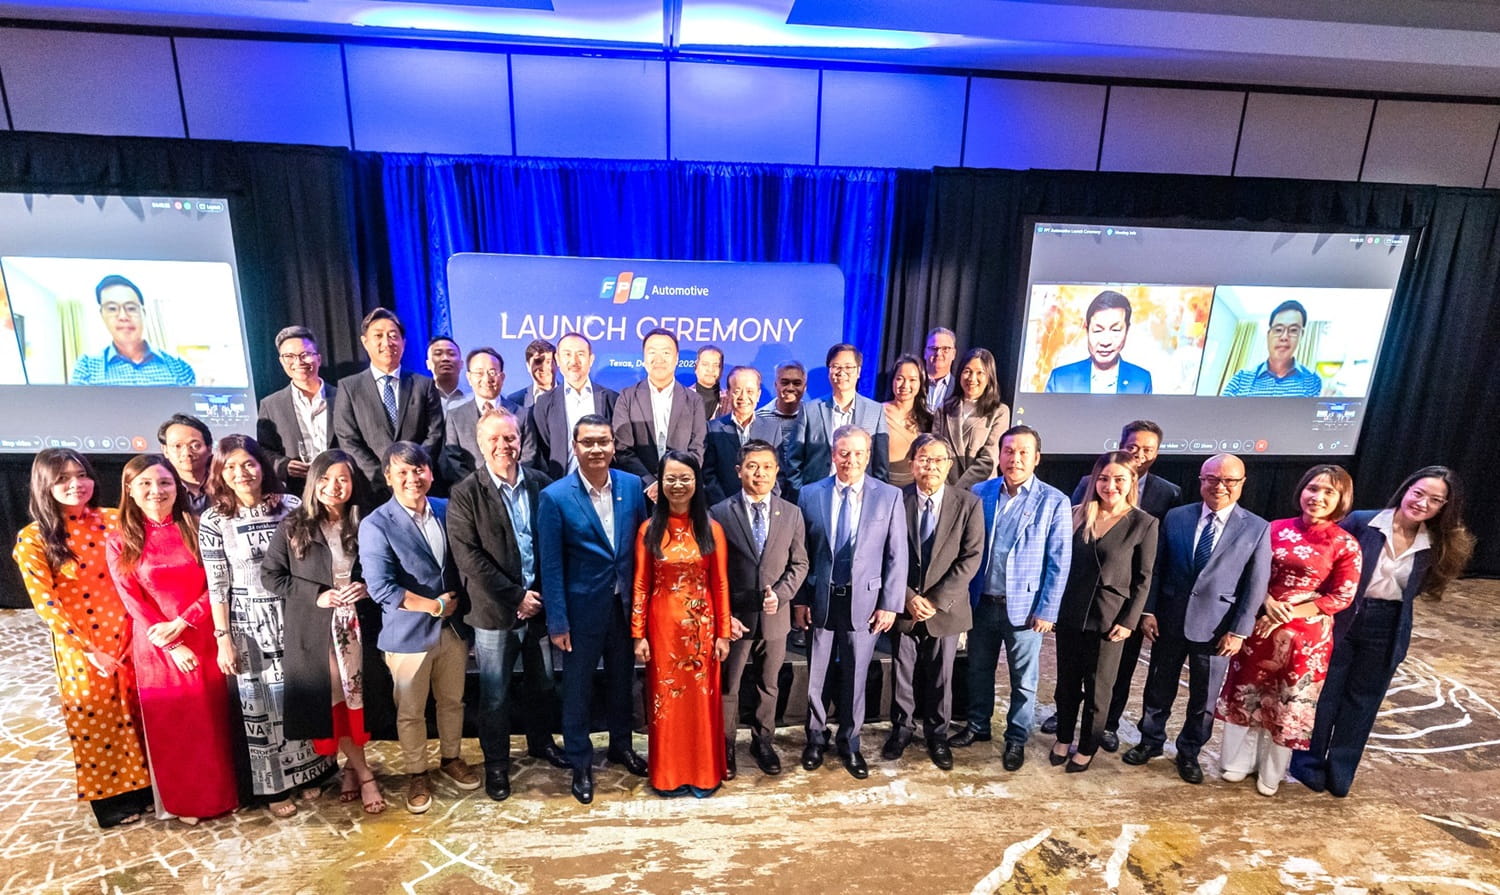 The ceremony was hosted in Texas, USA, with the attendance of FPT’s senior executives, clients, partners, and representative from the Consulate General of Vietnam in Houston